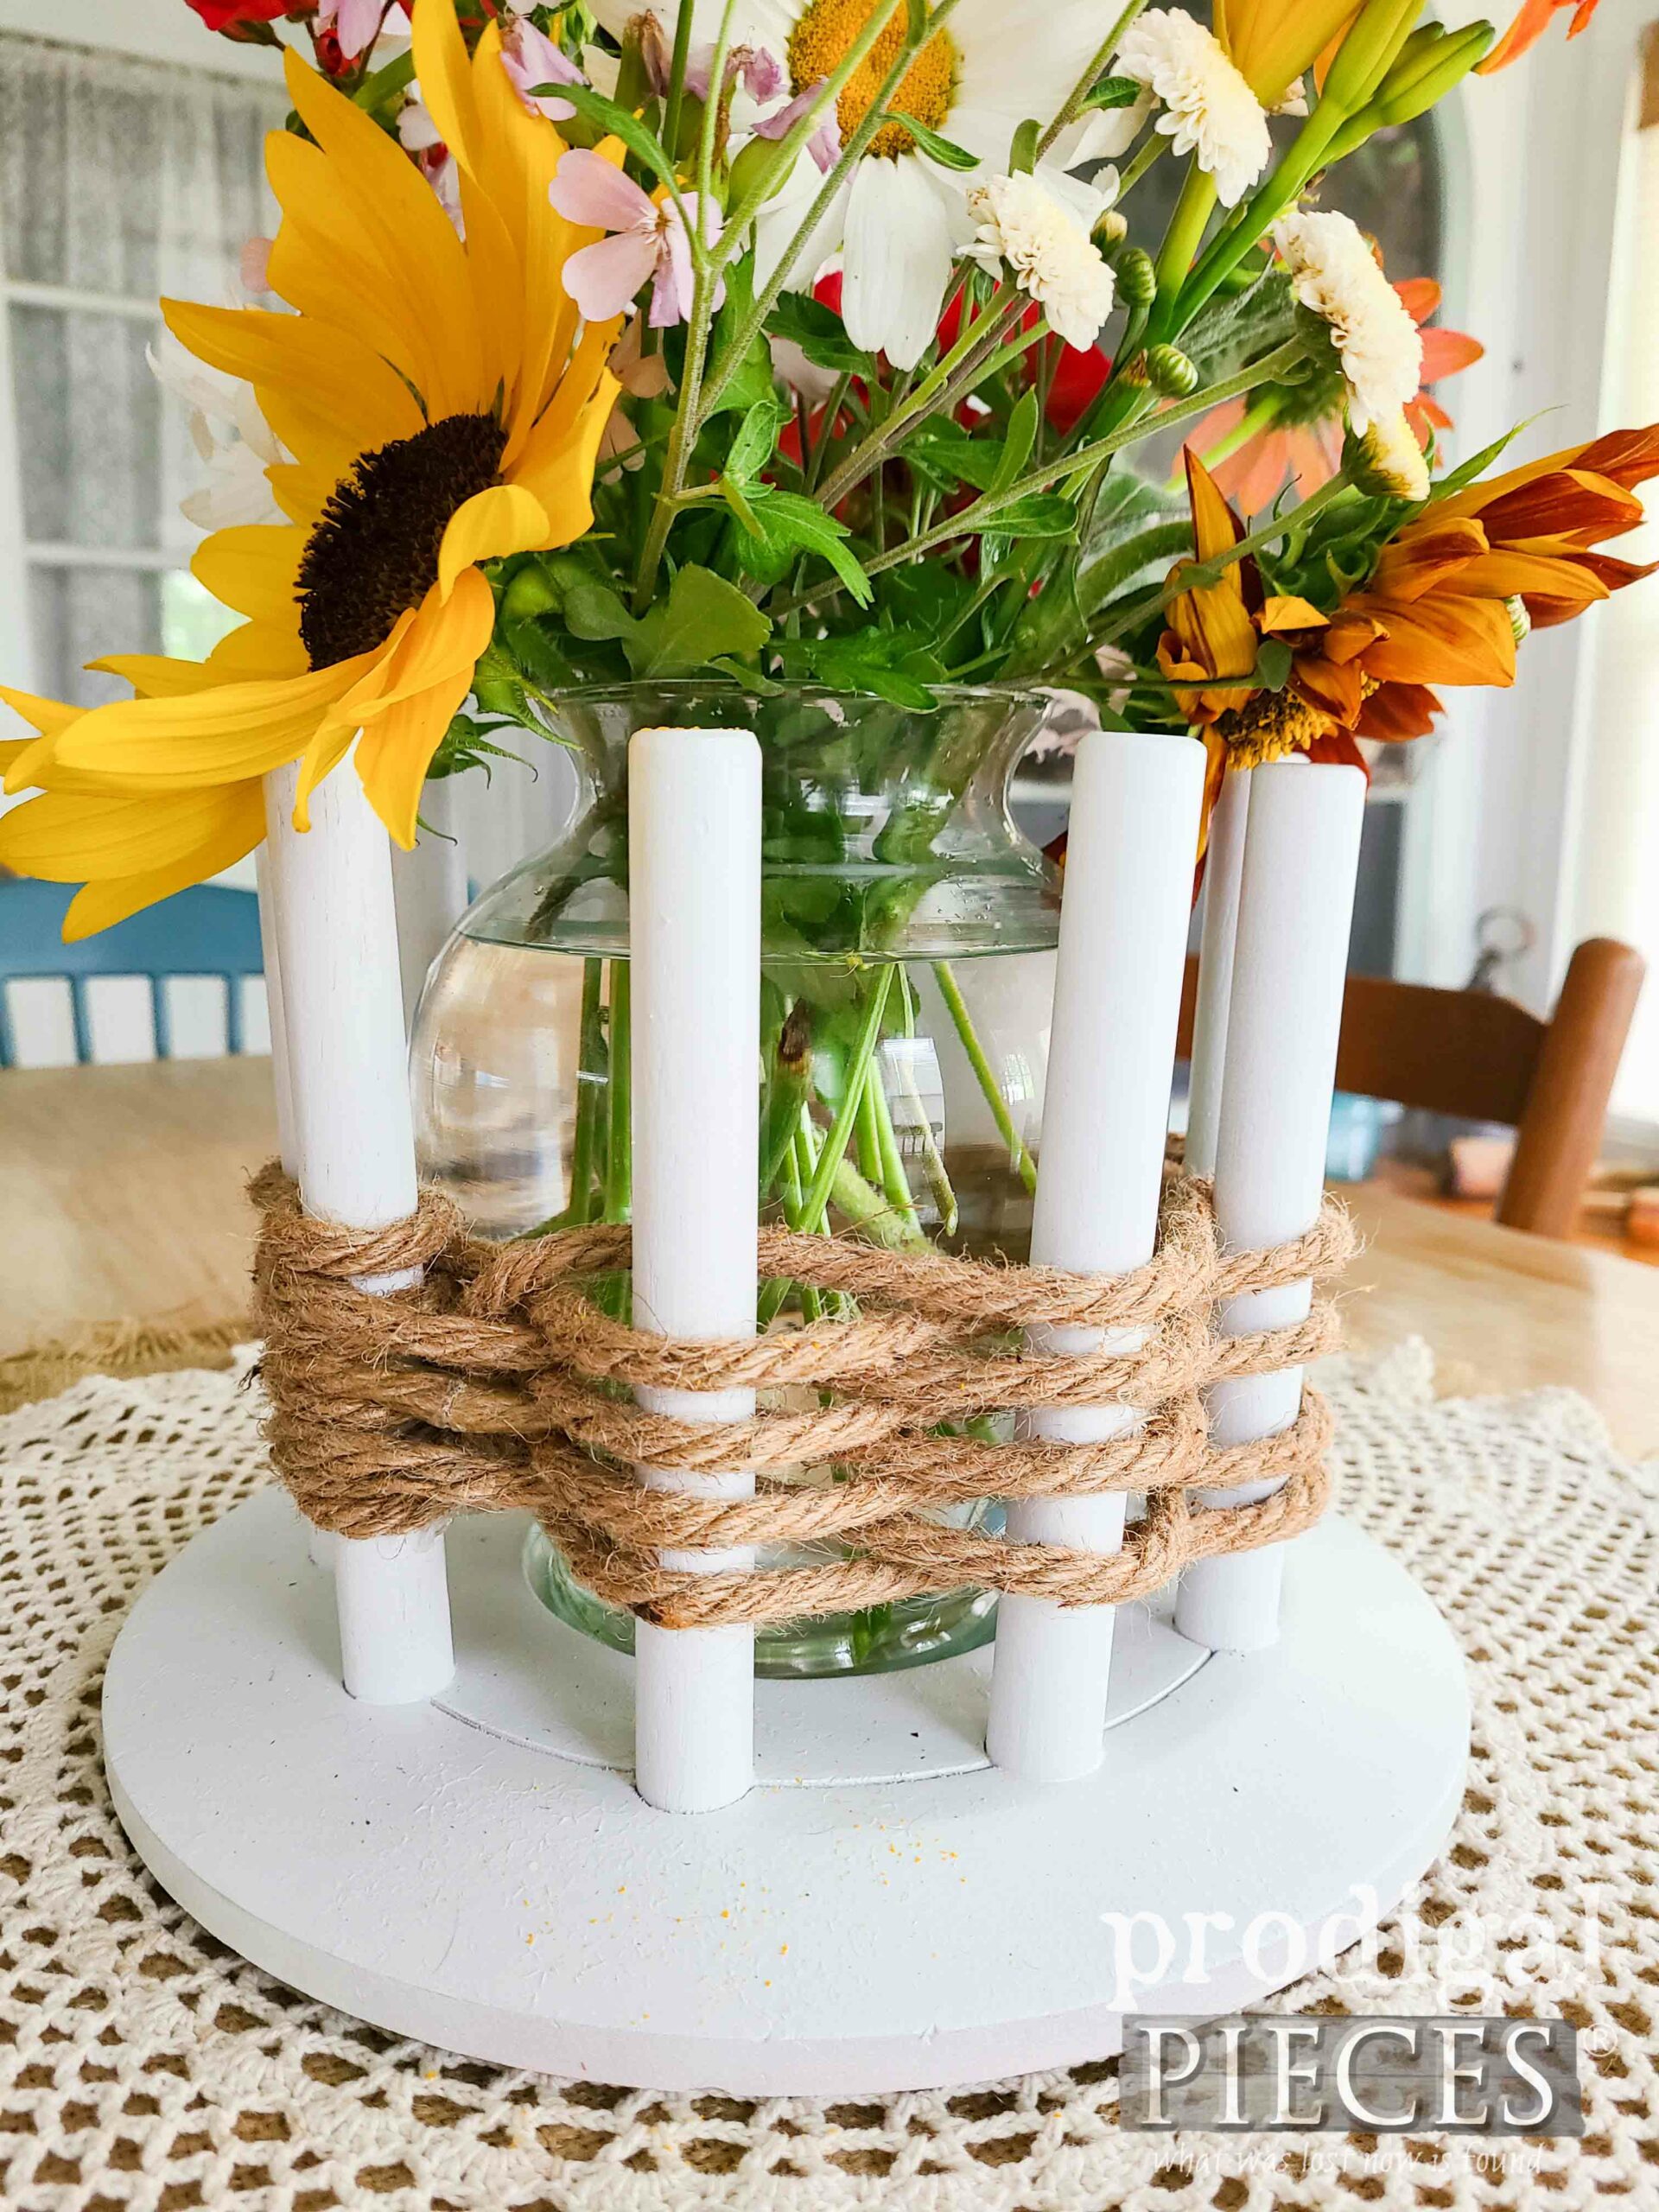 Upcycled DIY Rope Vase Centerpiece Created by Larissa of Prodigal Pieces | prodigalpieces.com #prodigalpieces #upcycled #repurposed #homedecor